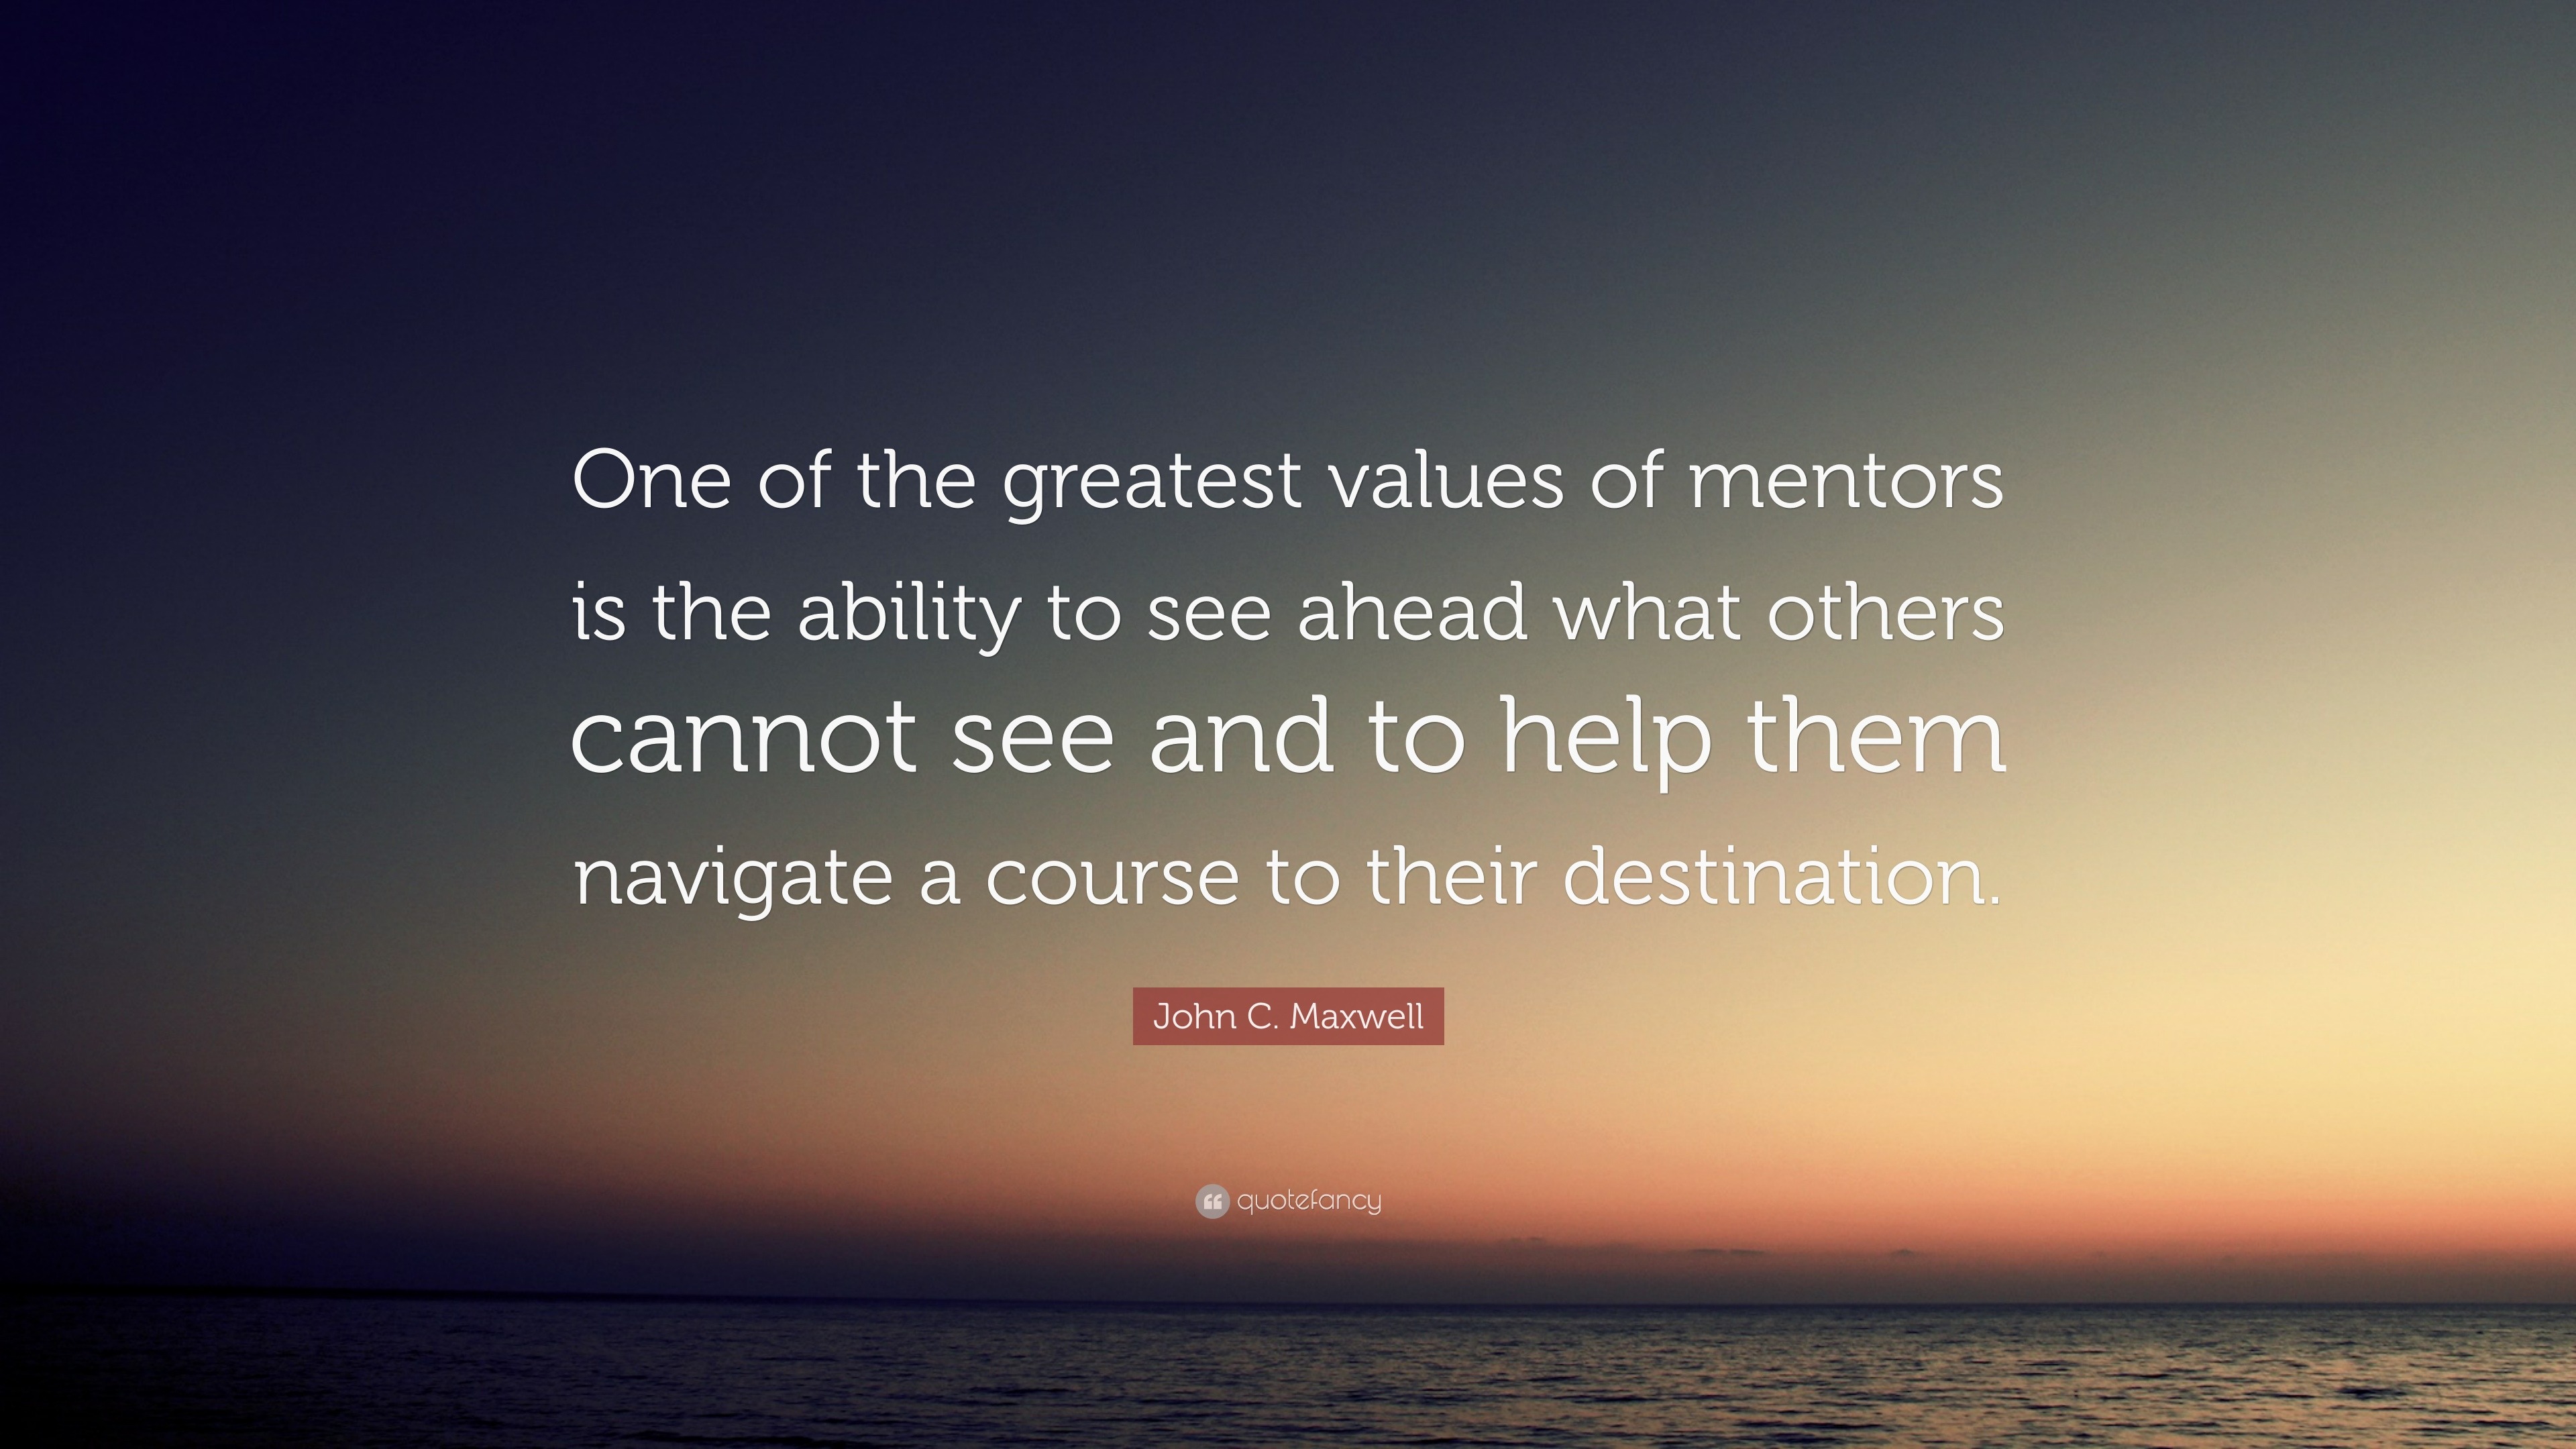 John C Maxwell Quote One Of The Greatest Values Of Mentors Is The Ability To See Ahead What Others Cannot See And To Help Them Navigate A Cou 12 Wallpapers Quotefancy